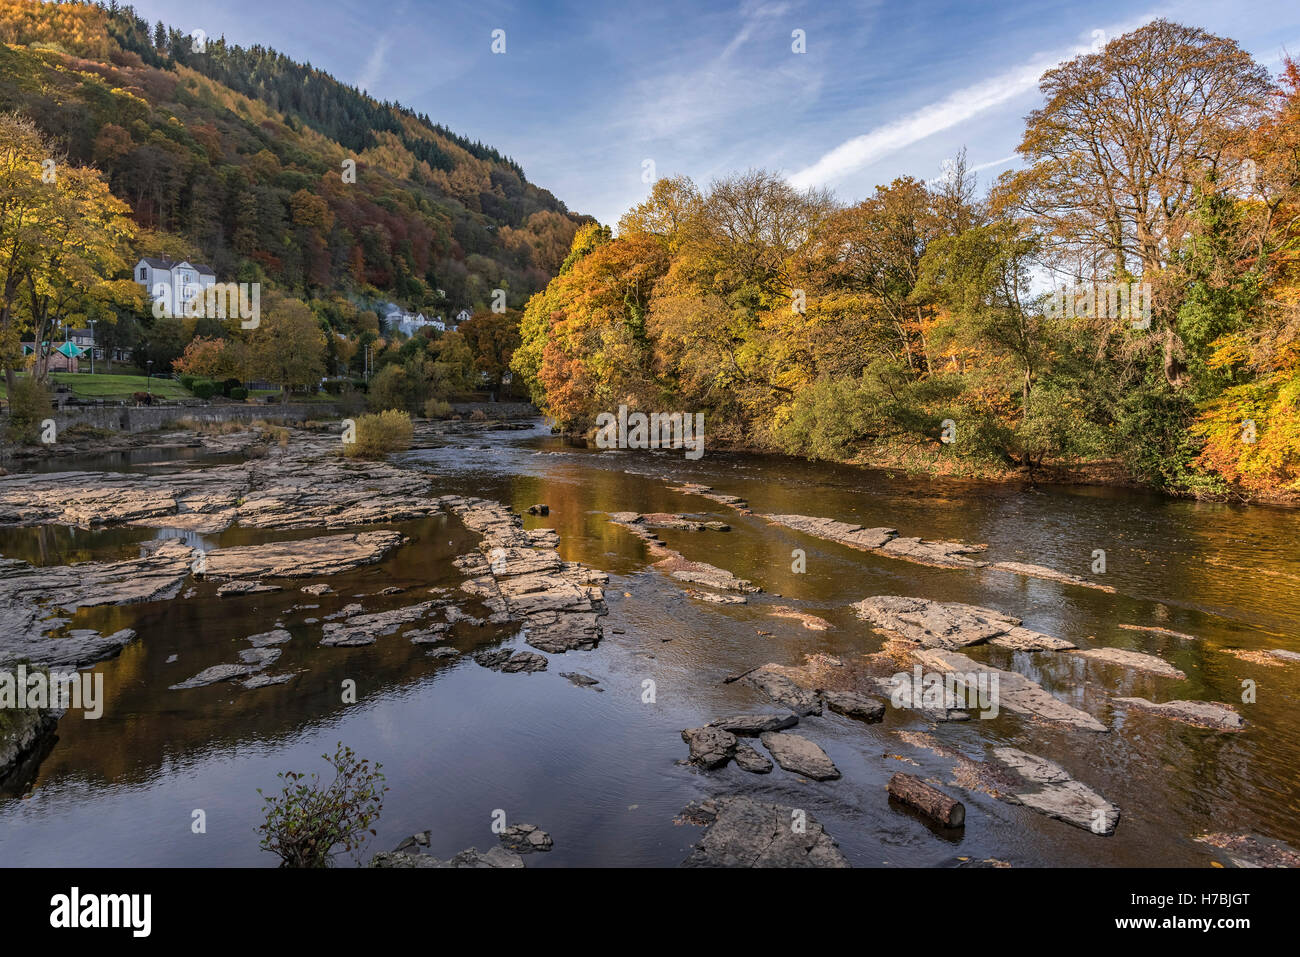 River Dee at llangollen Denbighshire North Wales. Autumn colours and leaves on the trees. Stock Photo